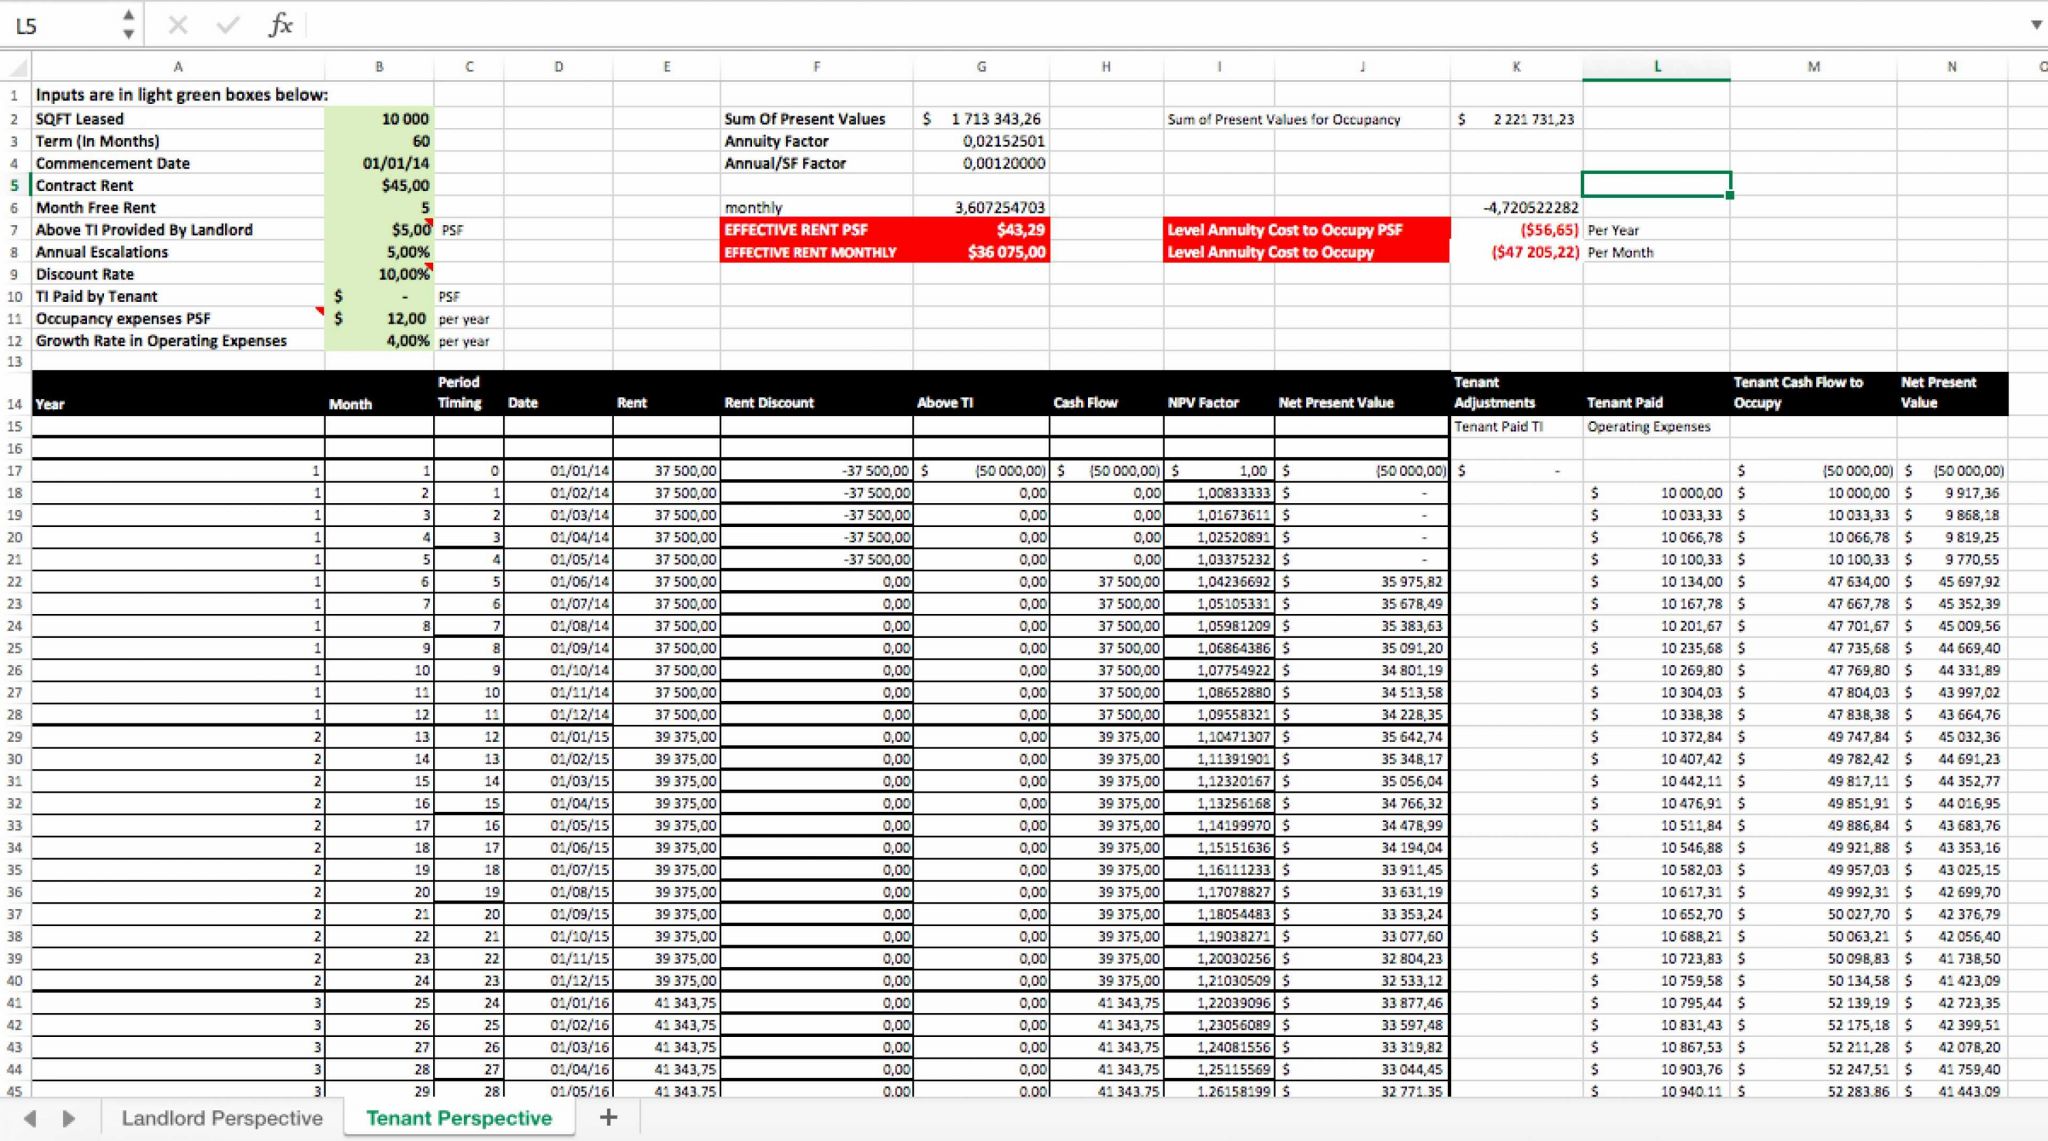 Expense Worksheet Excel Along with Expense Tracker Spreadsheet Unique Contract Tracking Spreadsheet and